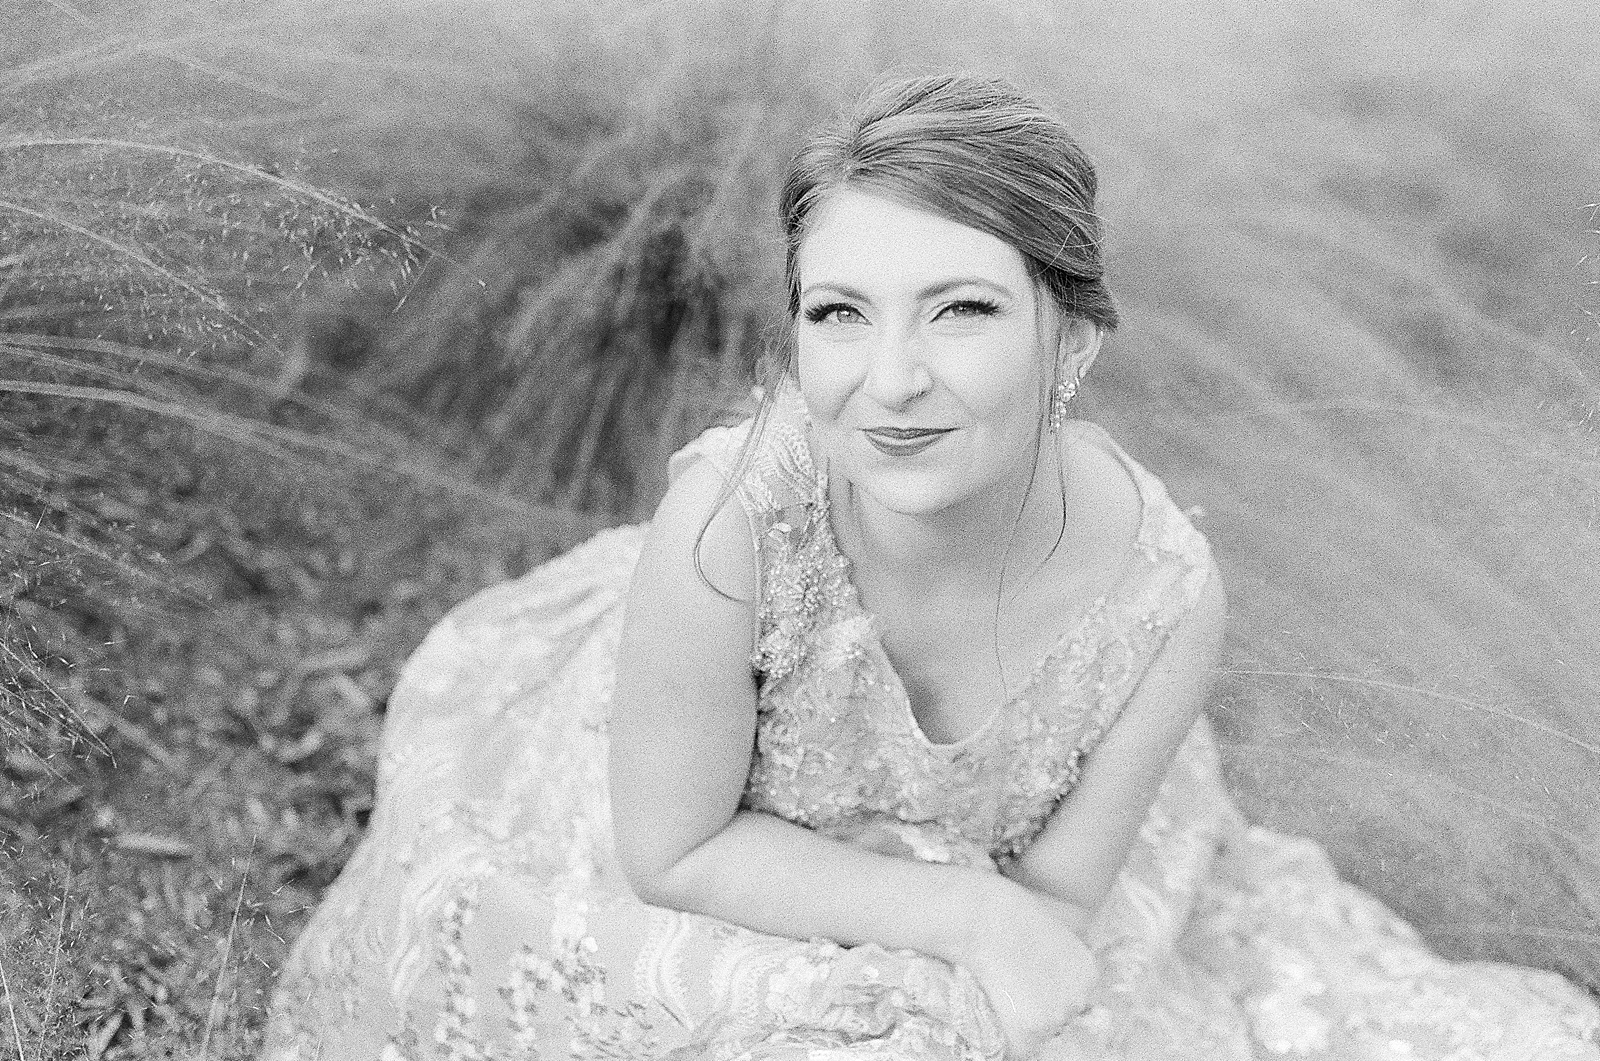 Asheville Bridal Editorial Black and White of Bride Smiling at Camera Photo